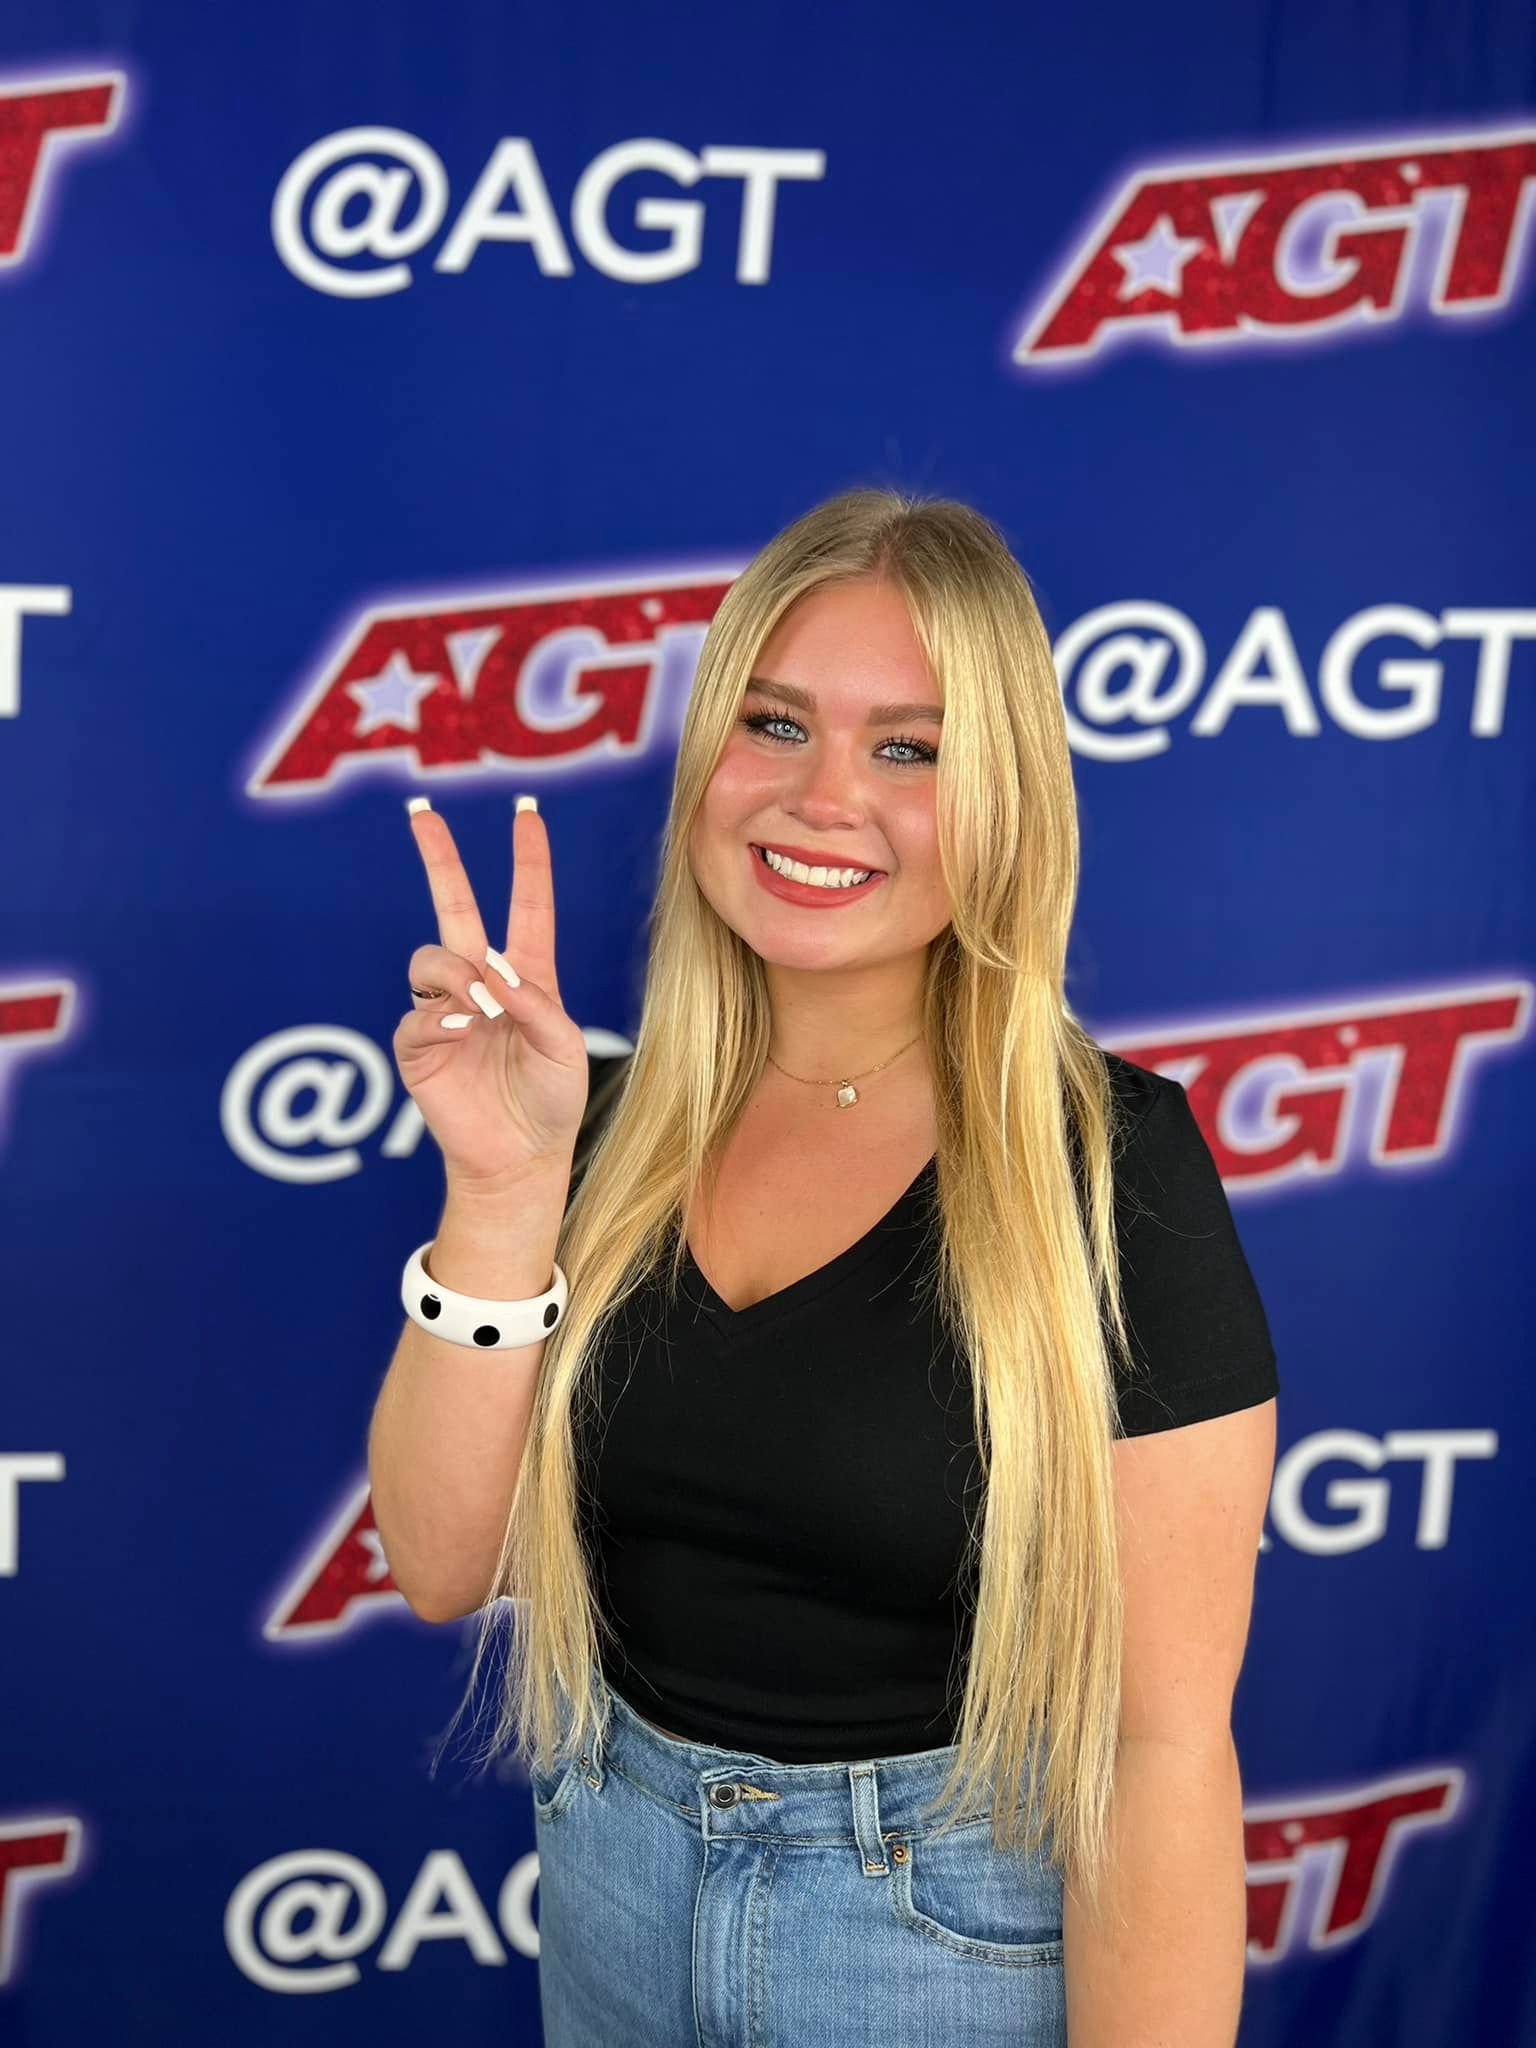 Ava Swiss with a peace hand sign smiling in front of the agt banner